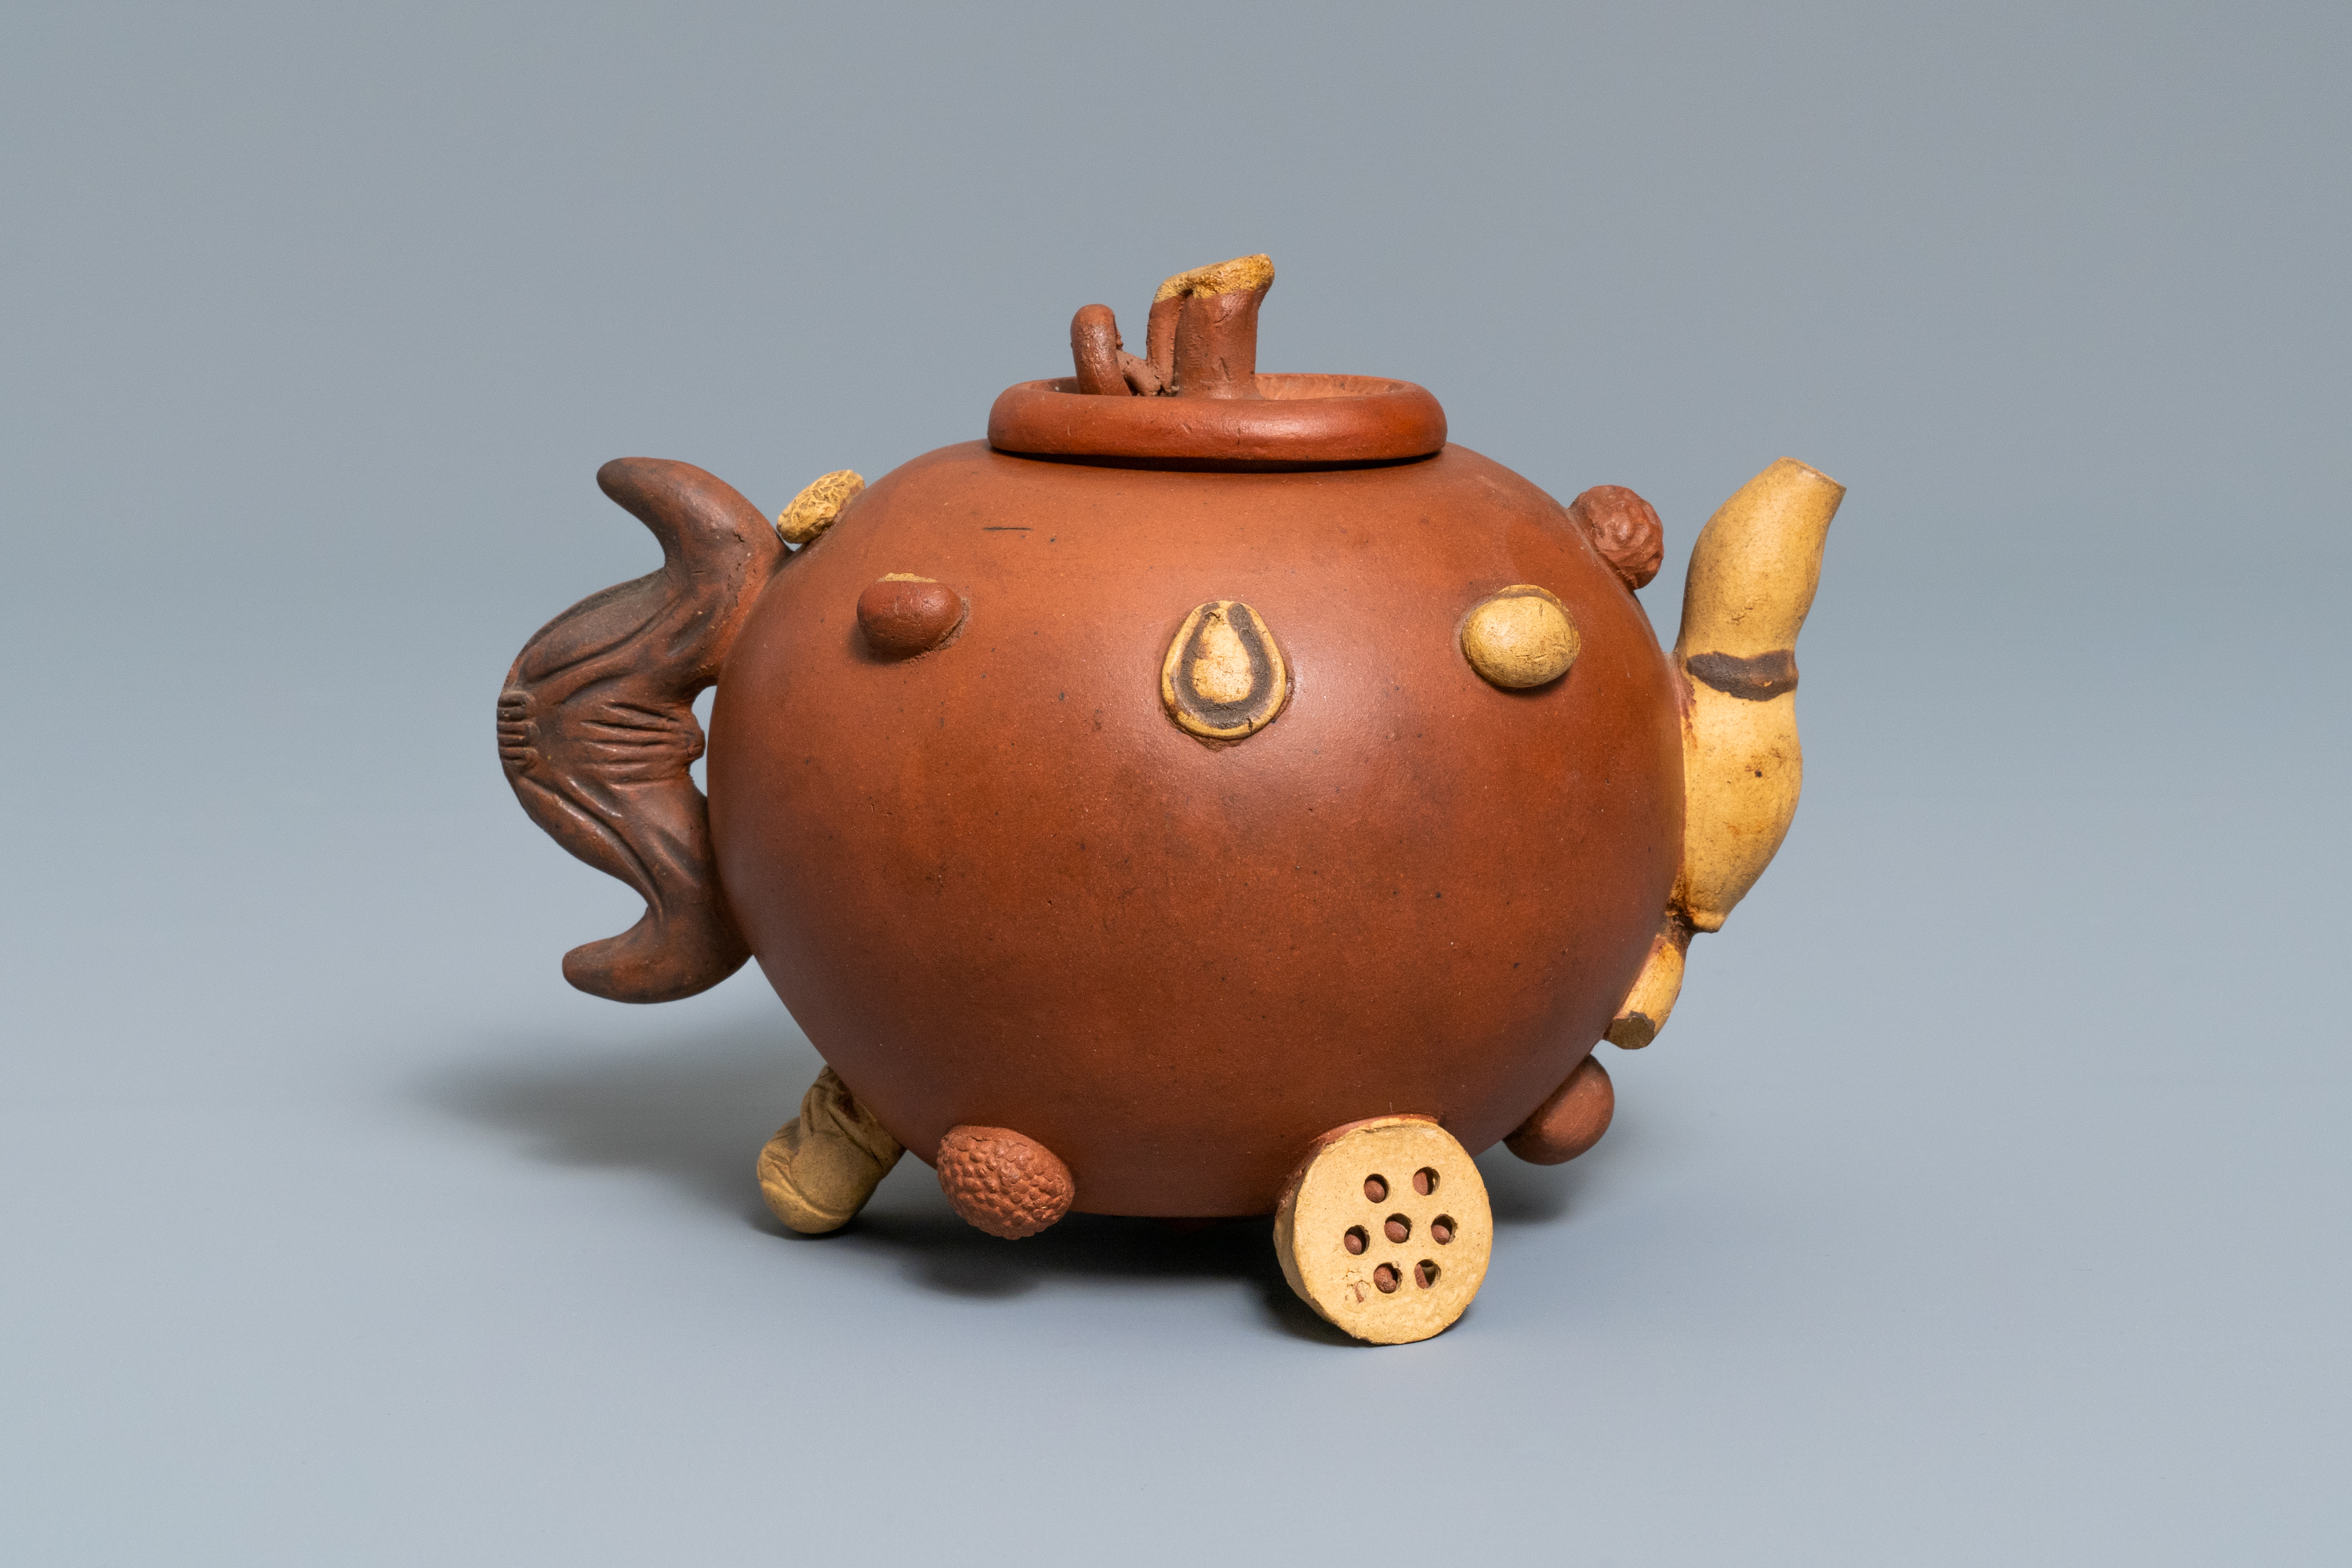 A Chinese Yixing stoneware relief-decorated teapot with nuts and fruits, impressed mark, 19th C. - Image 5 of 8